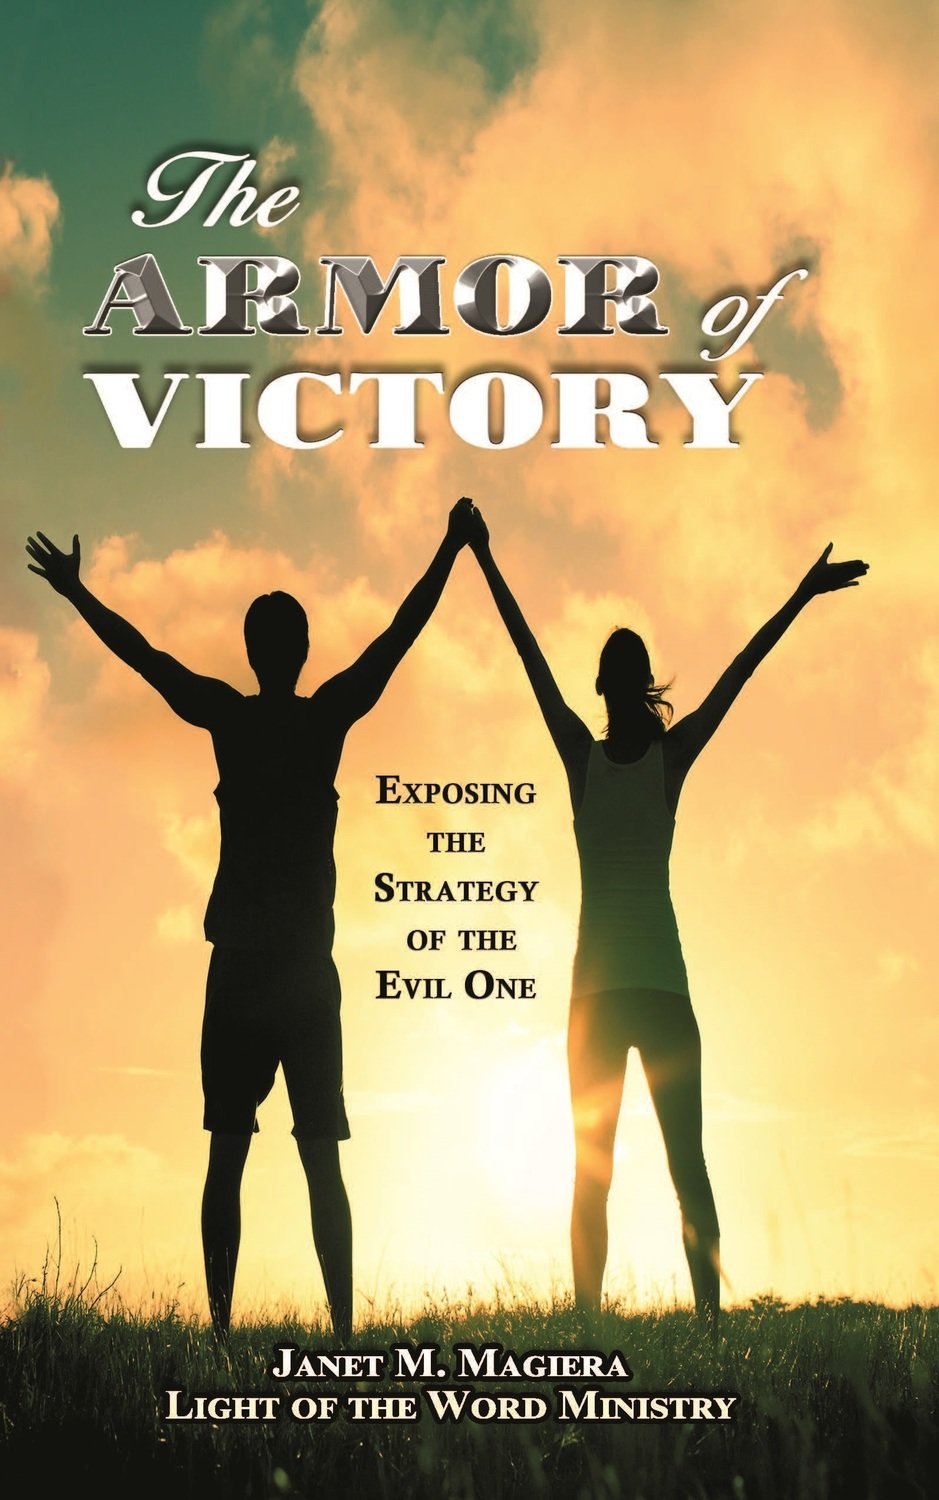 The Armor of Victory -- Exposing the Strategy of the Evil One